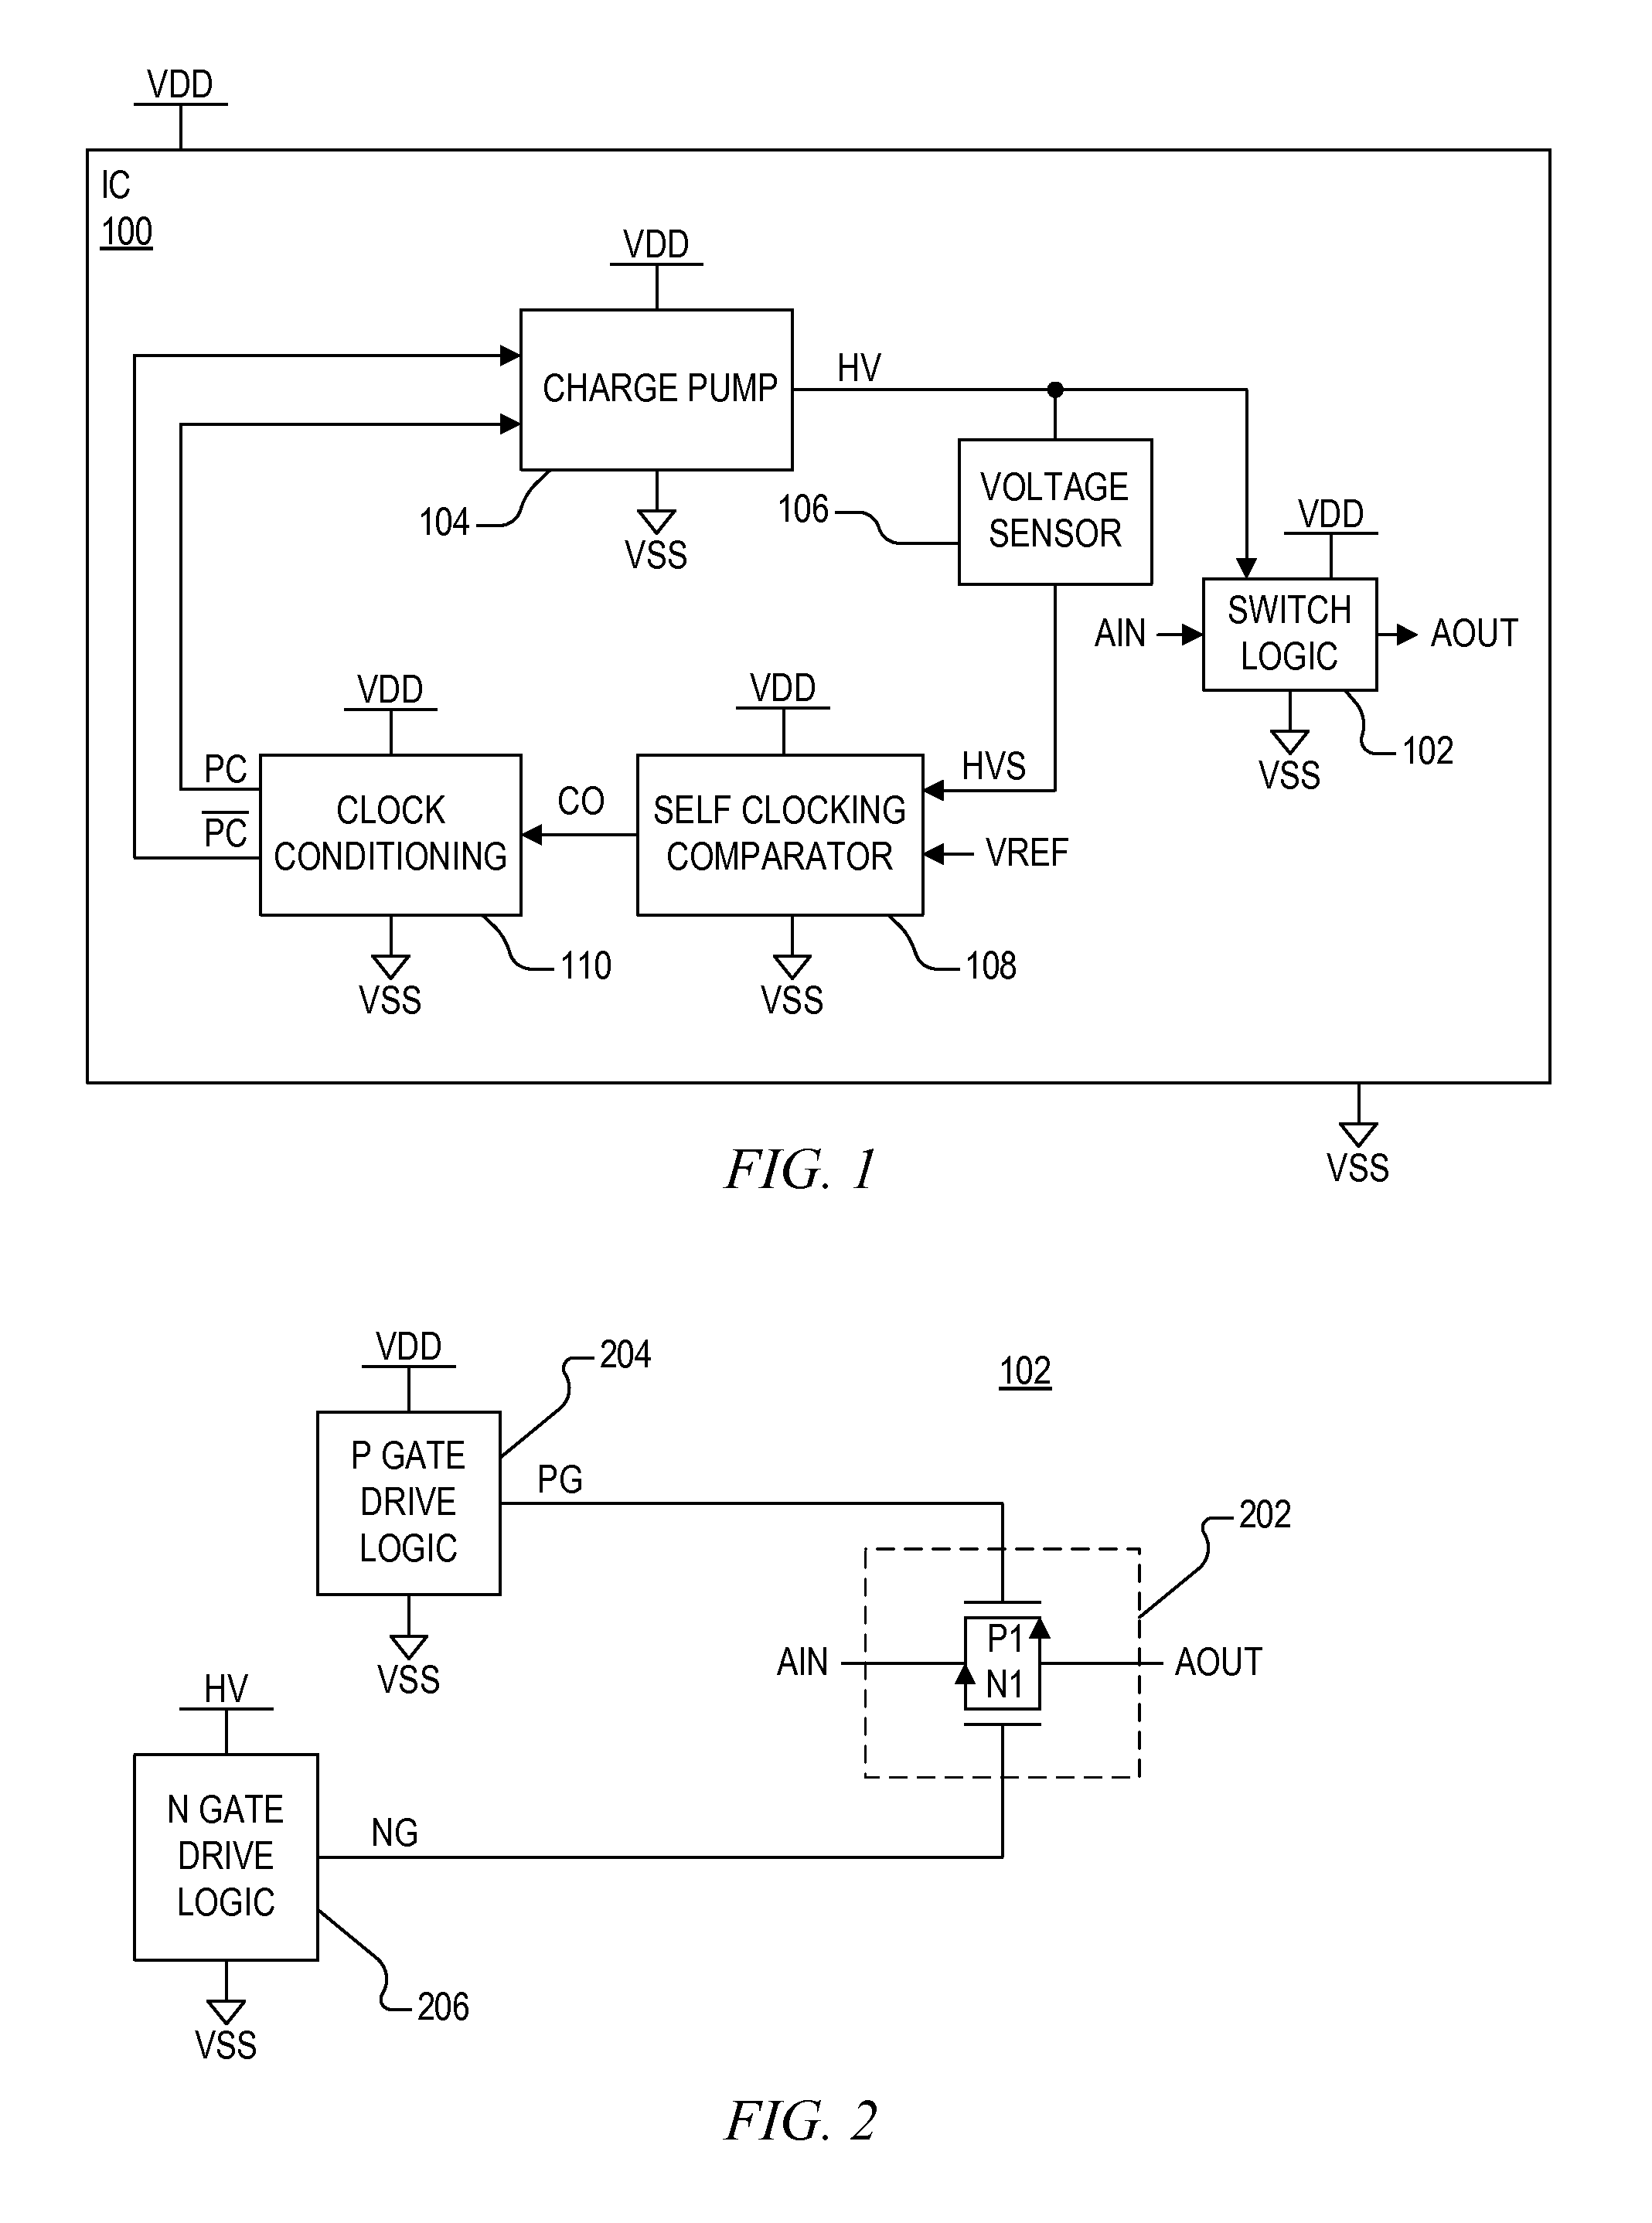 Self clocking comparator for a charge pump